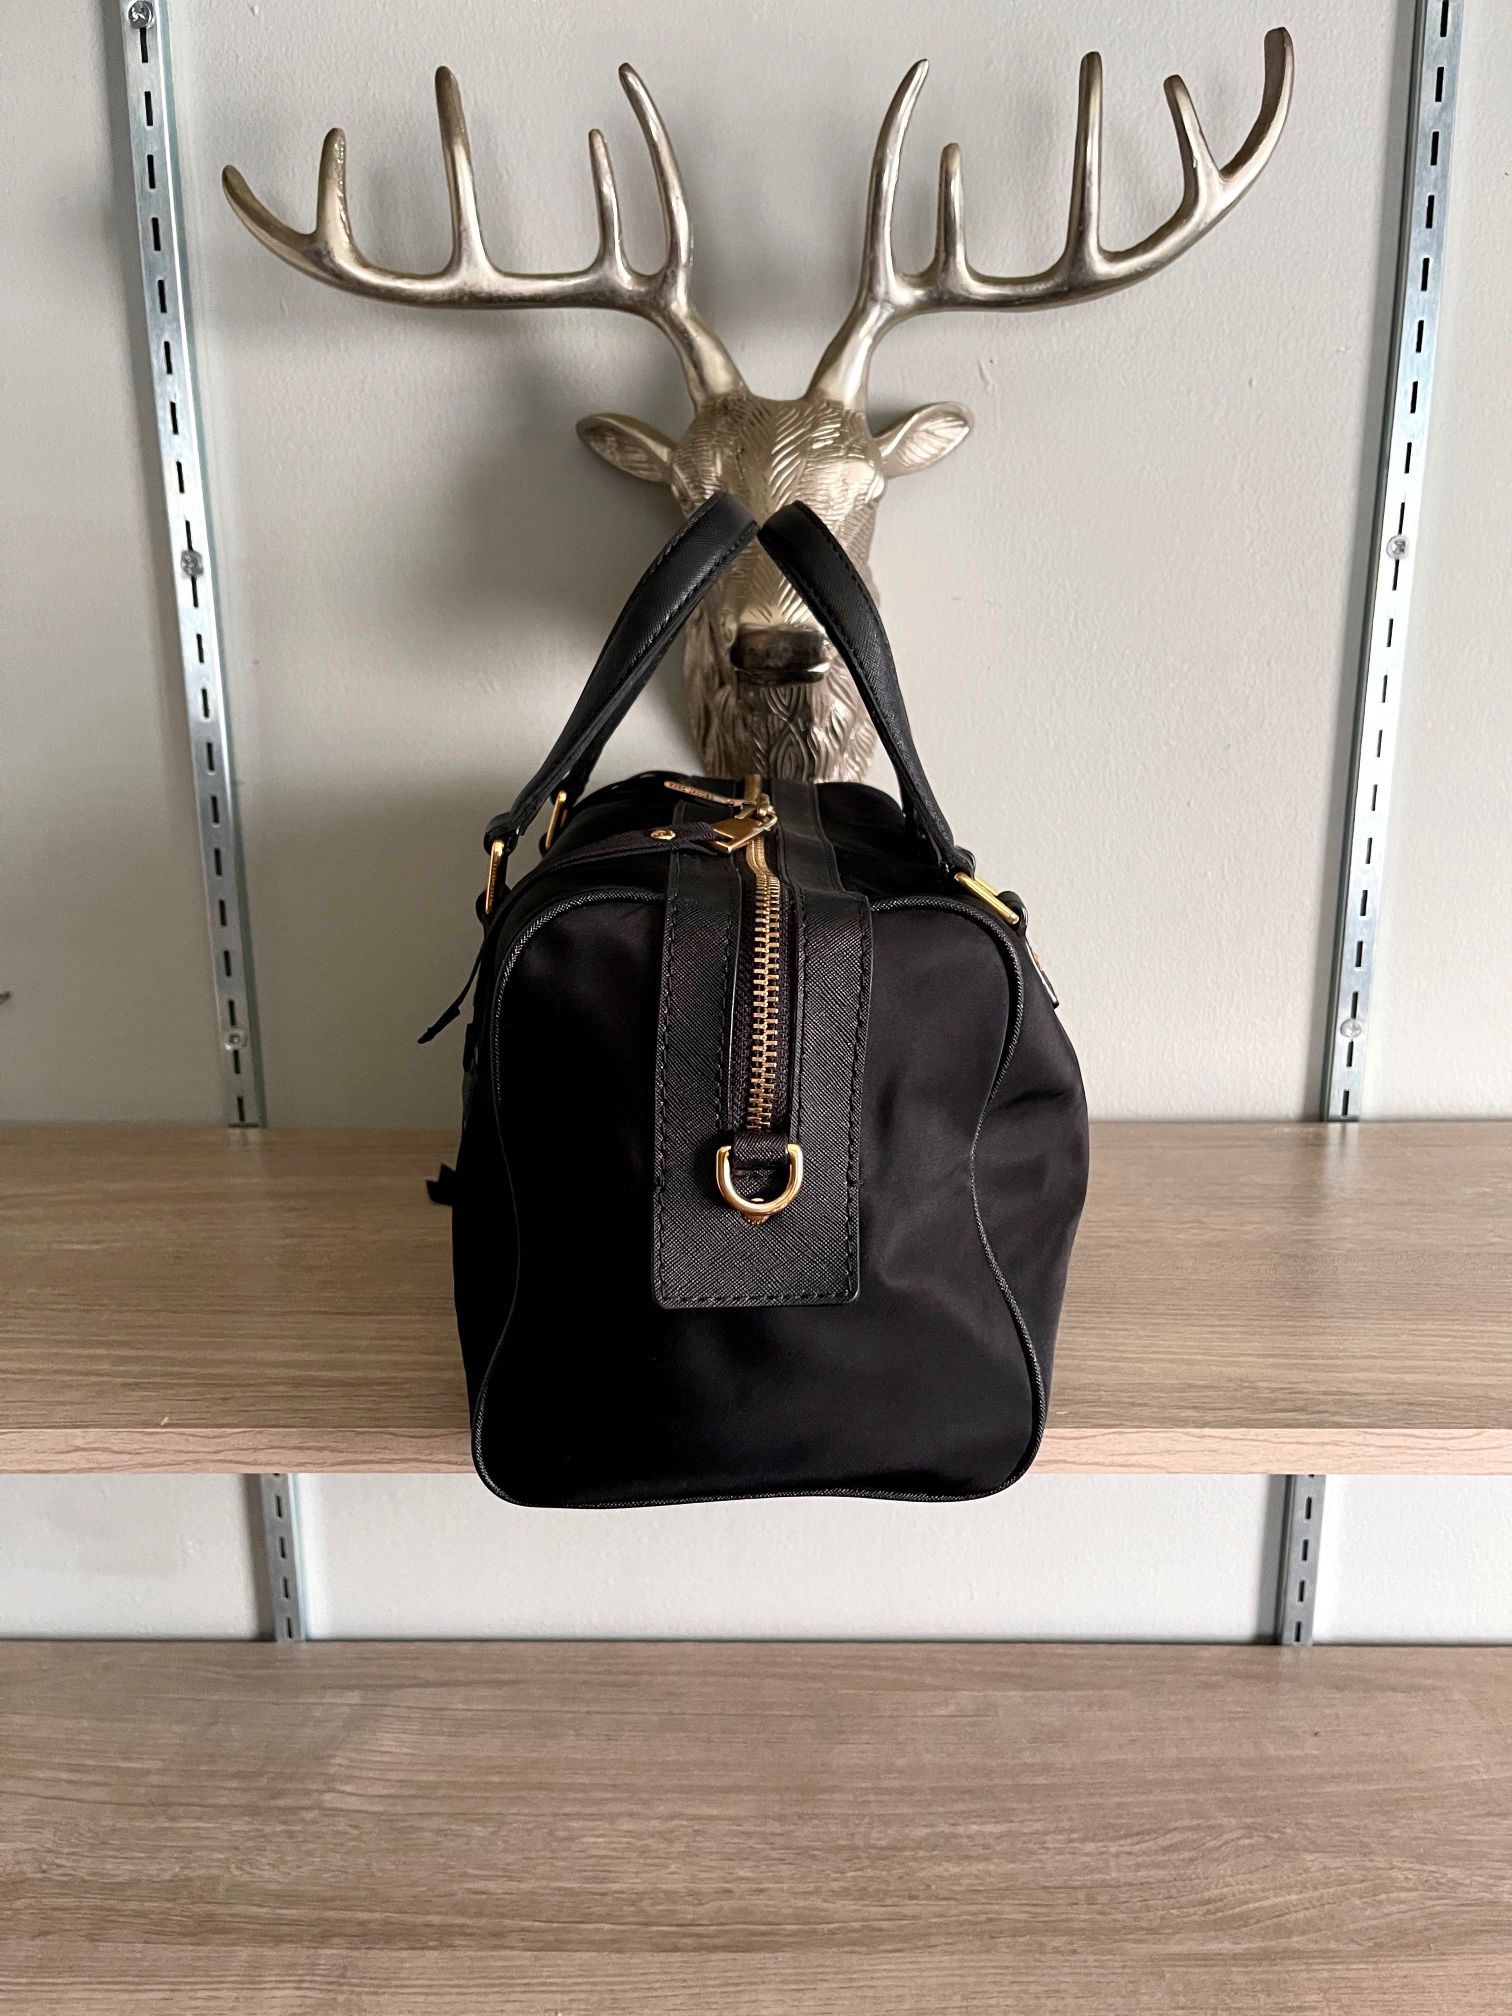 Women’s Marc Jacobs handbag black with gold trims. Retail $360. Great condition! Clean interior, exterior. 